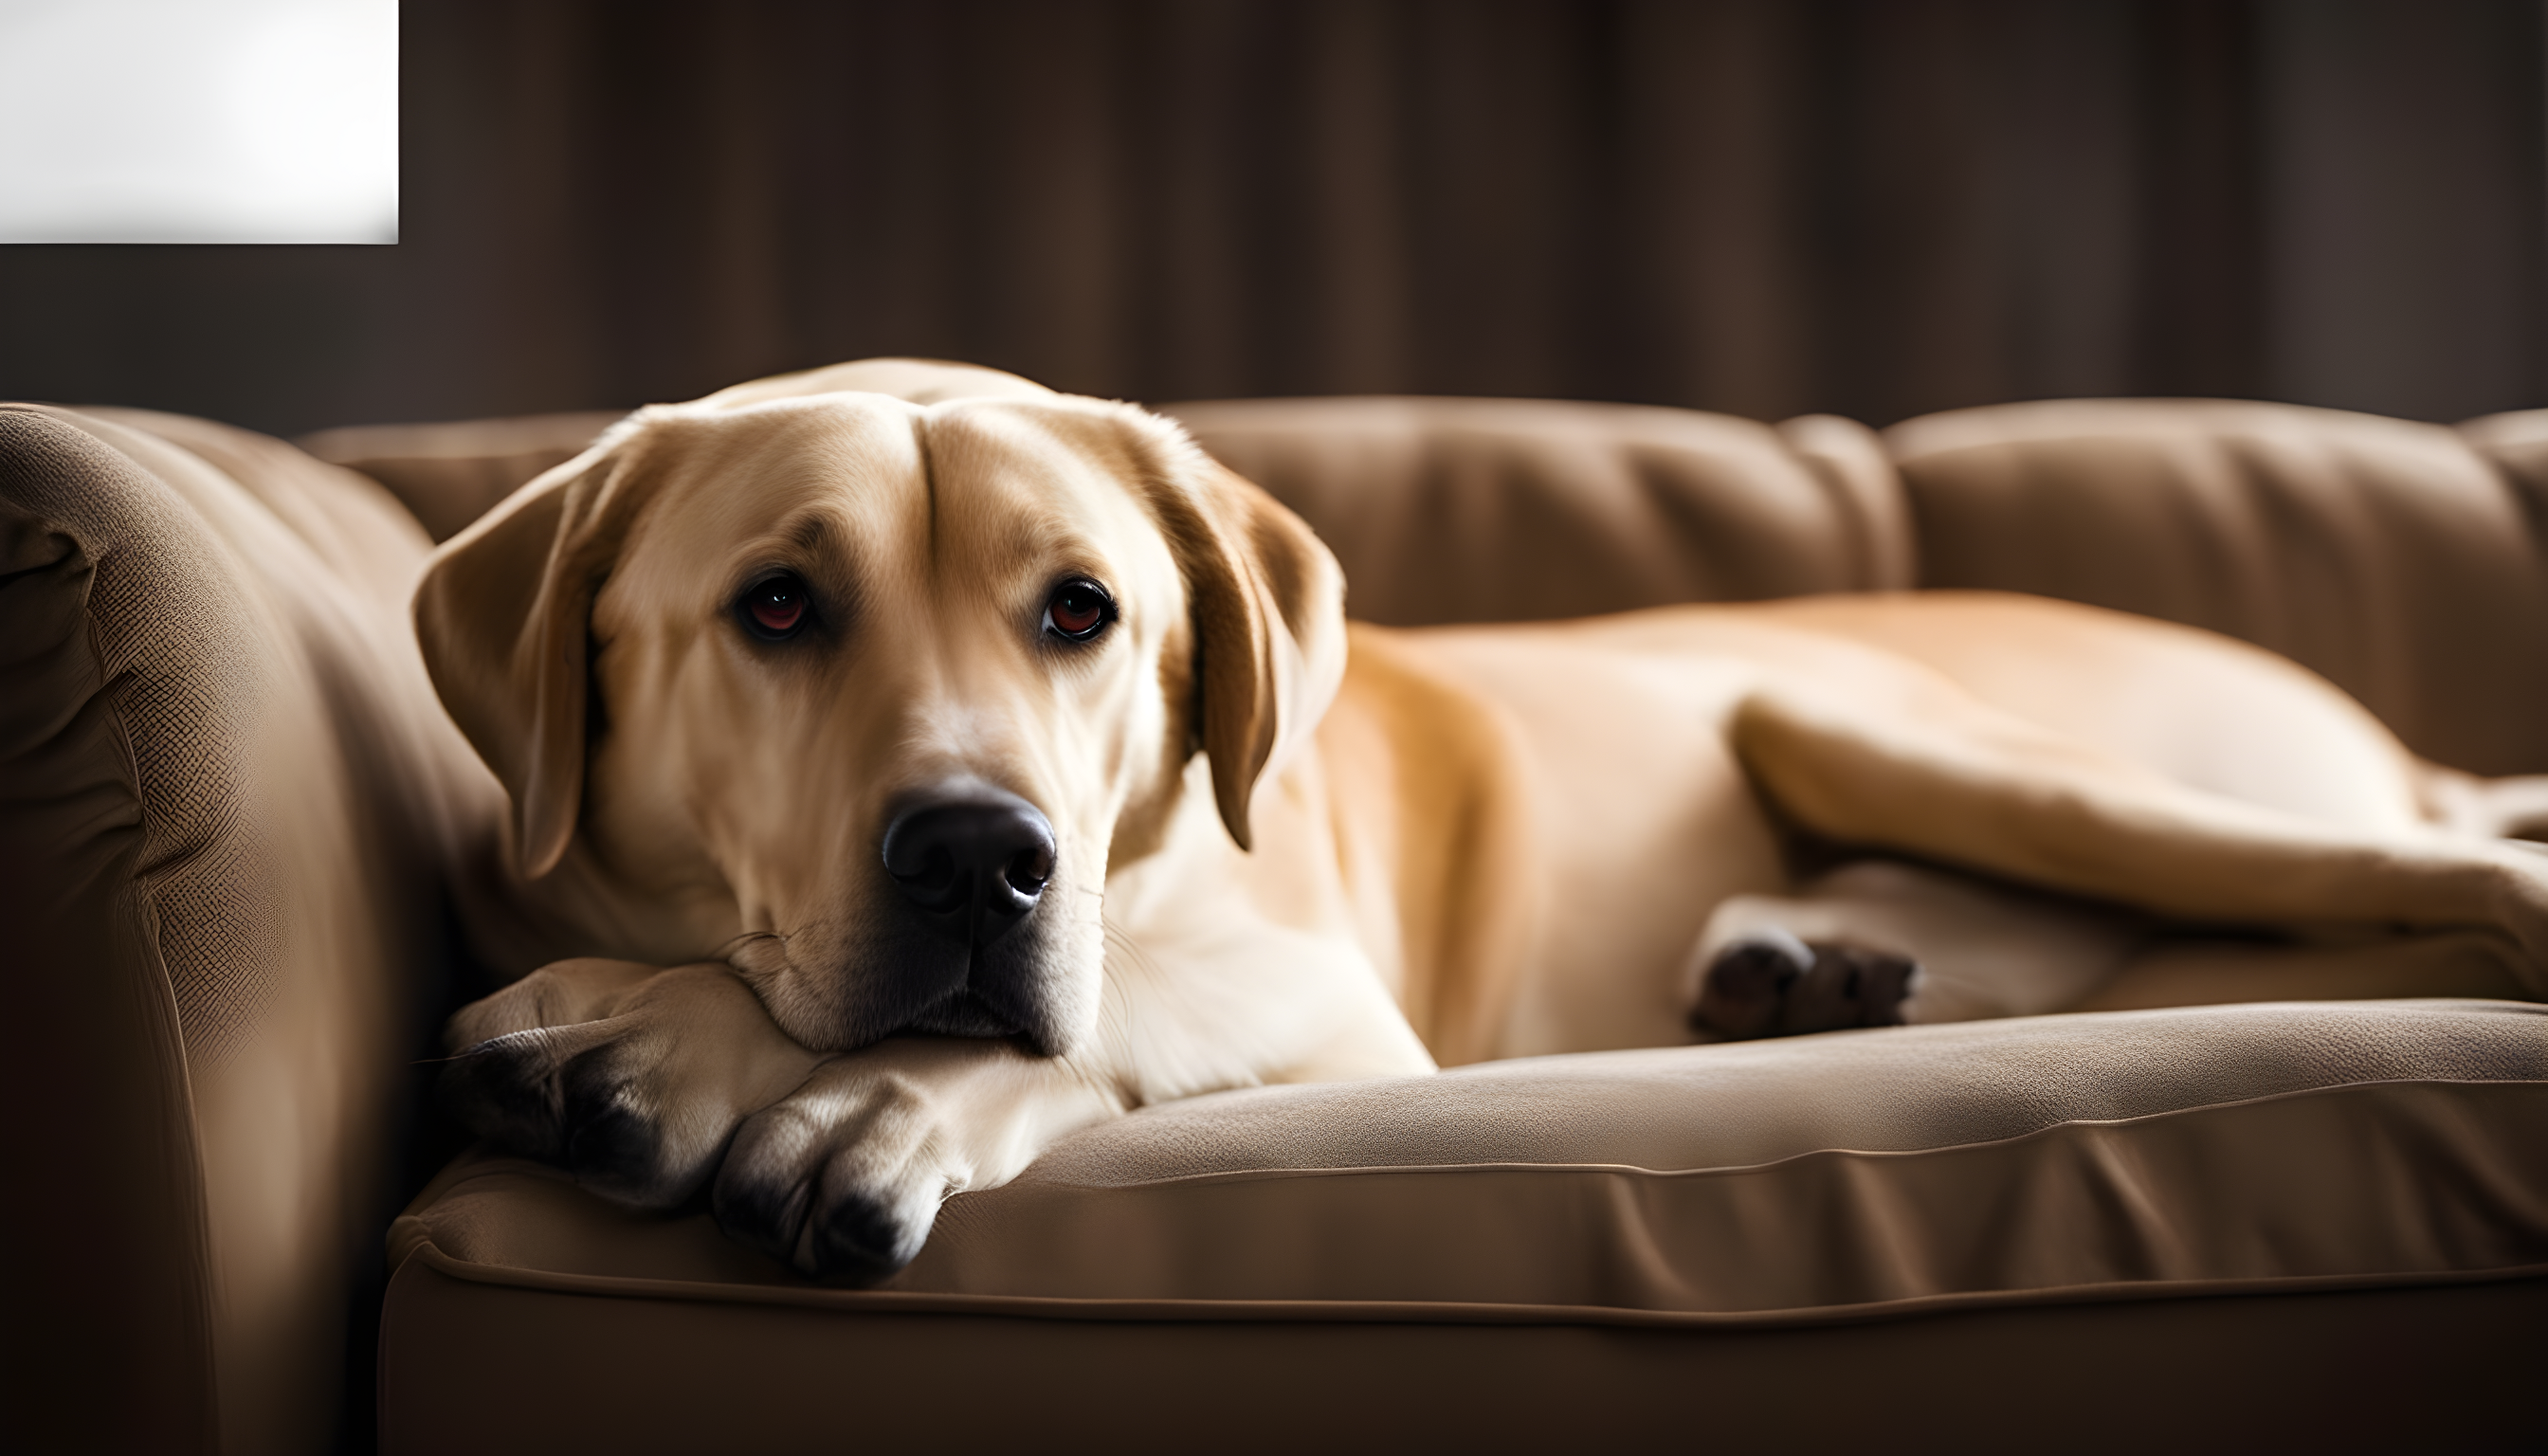 British Lab sprawled on a couch like the king of chill